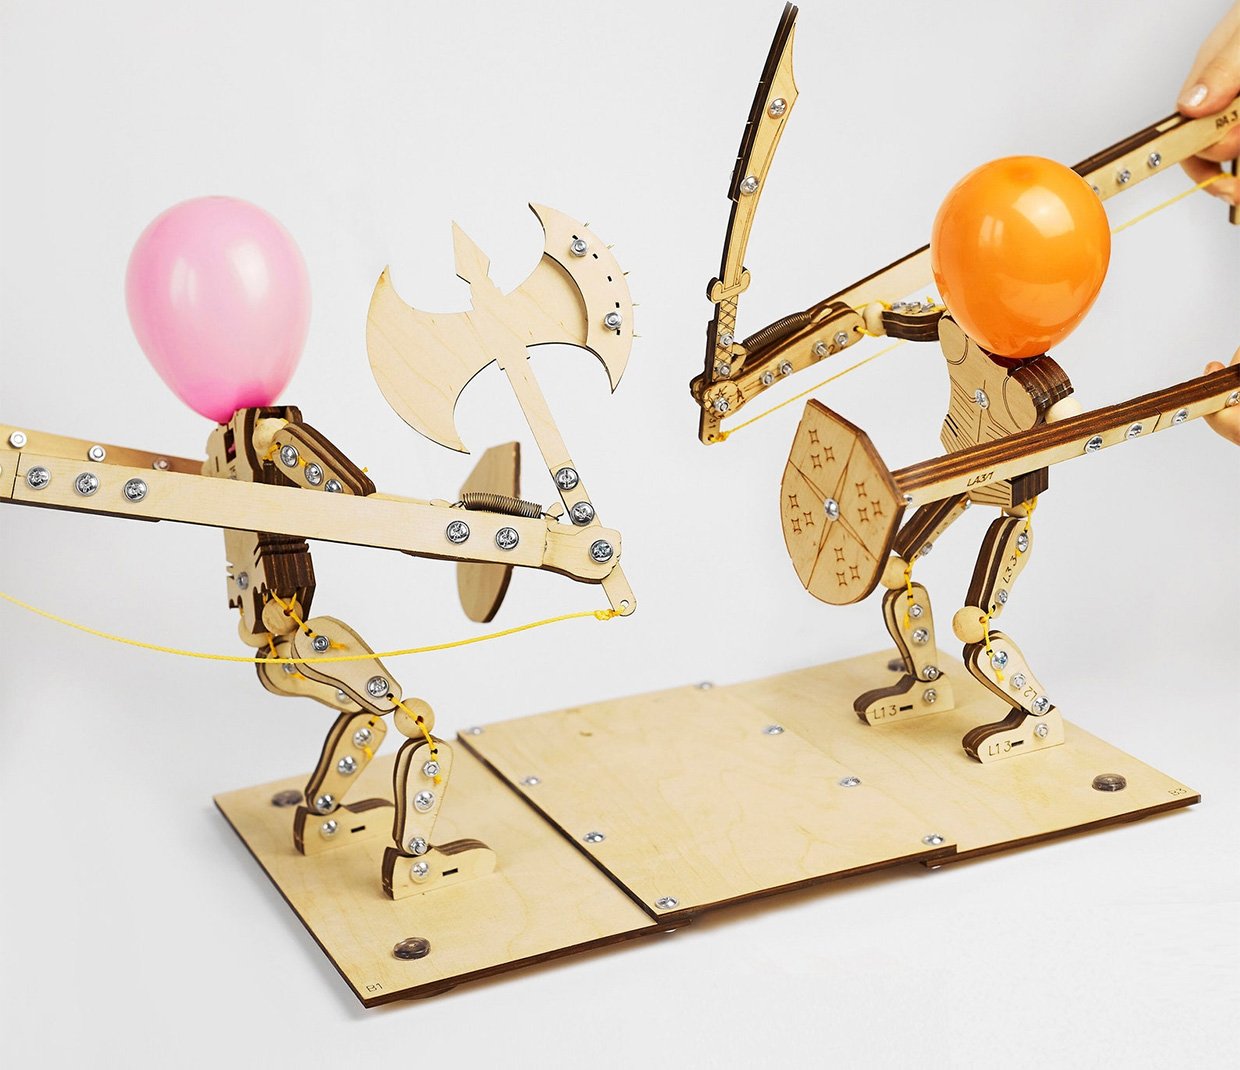 Balloon Fighter Game